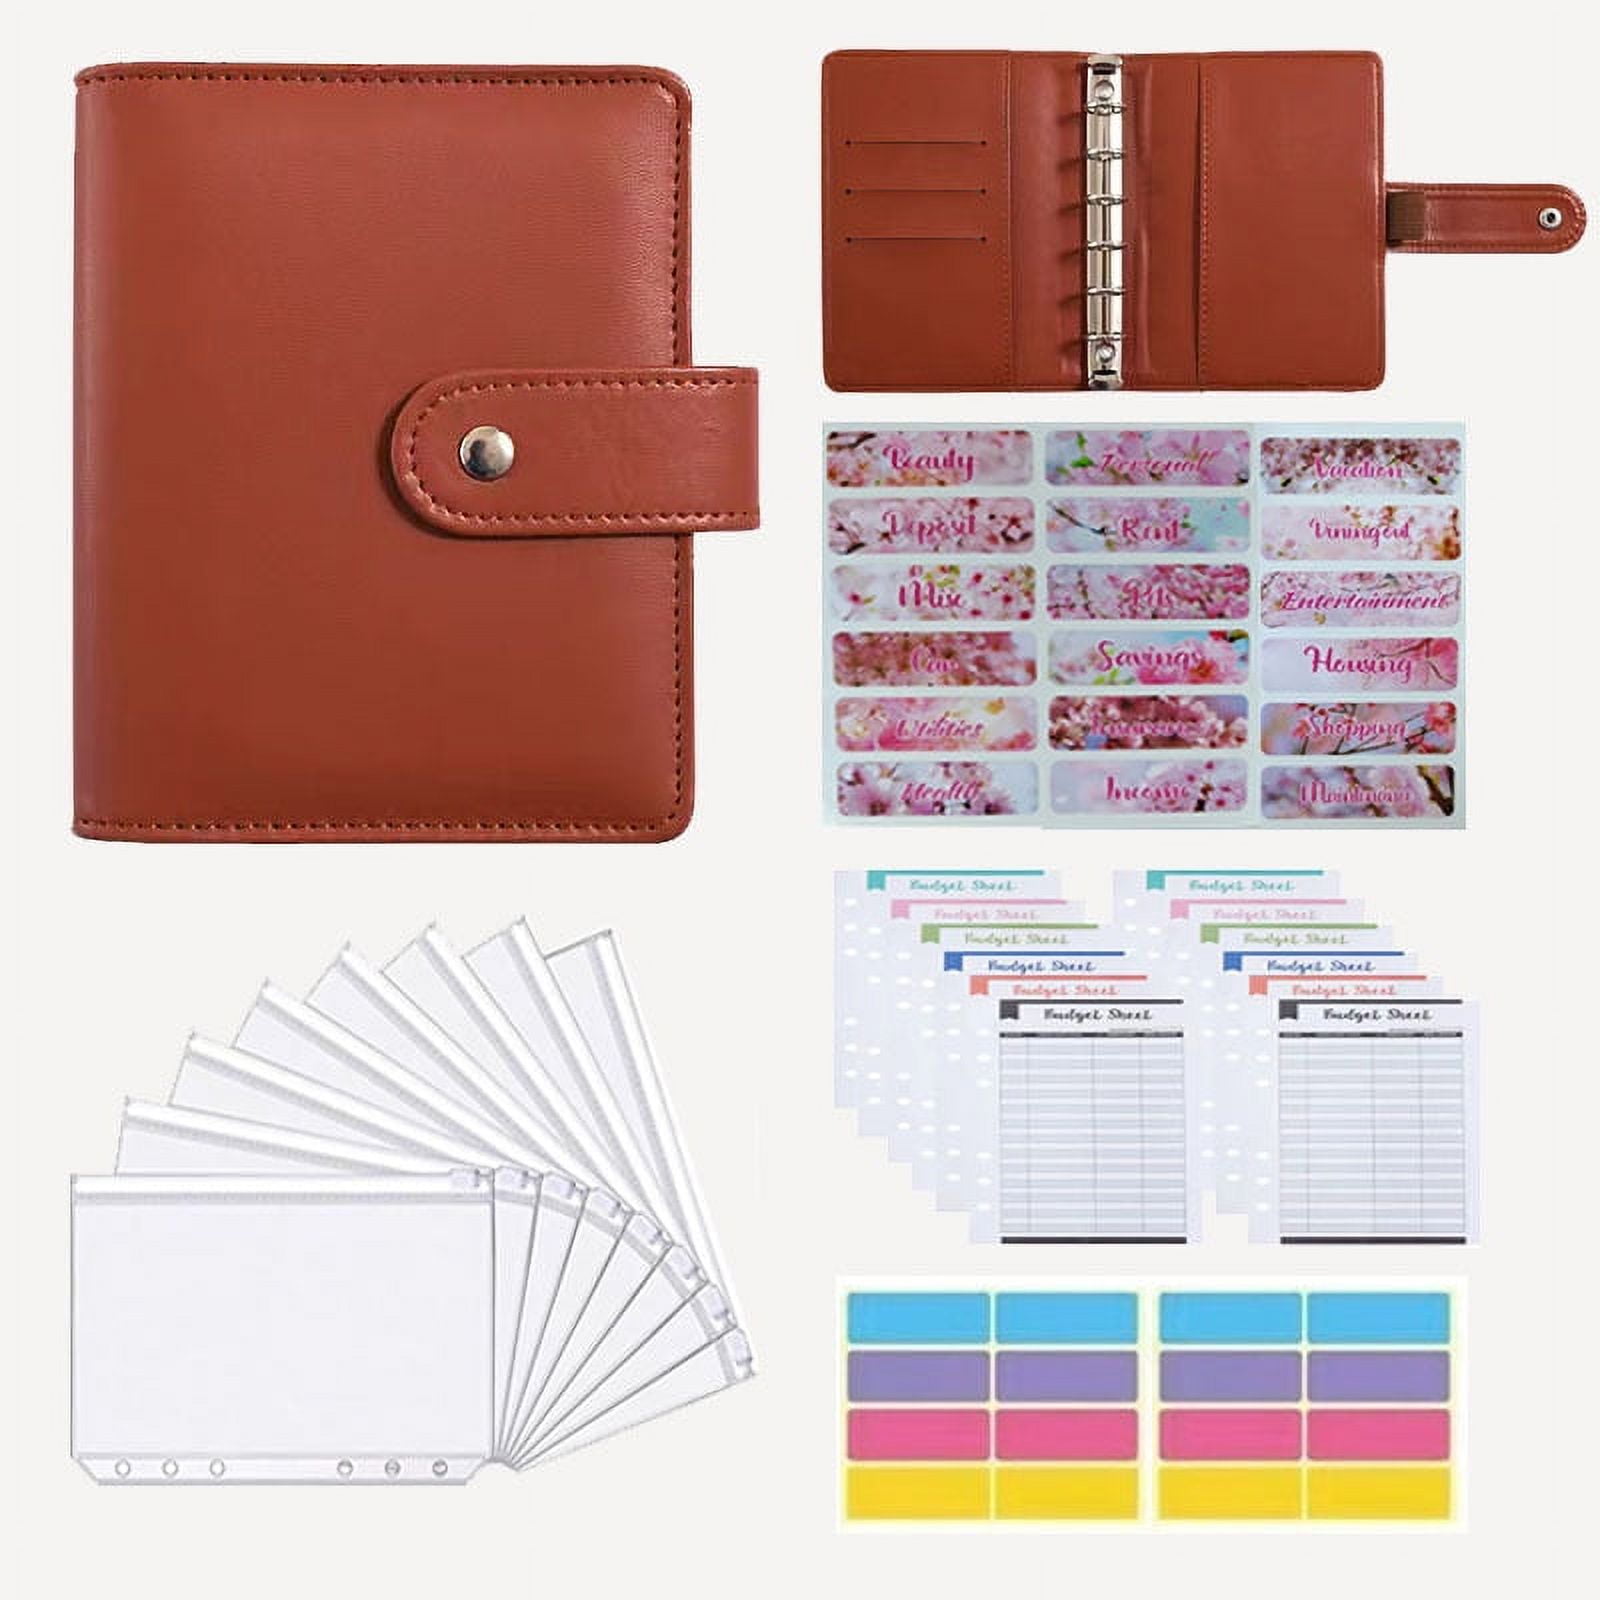 B5 Large Leather Binder Planner with Refillable Inserts – Bujo & Marks